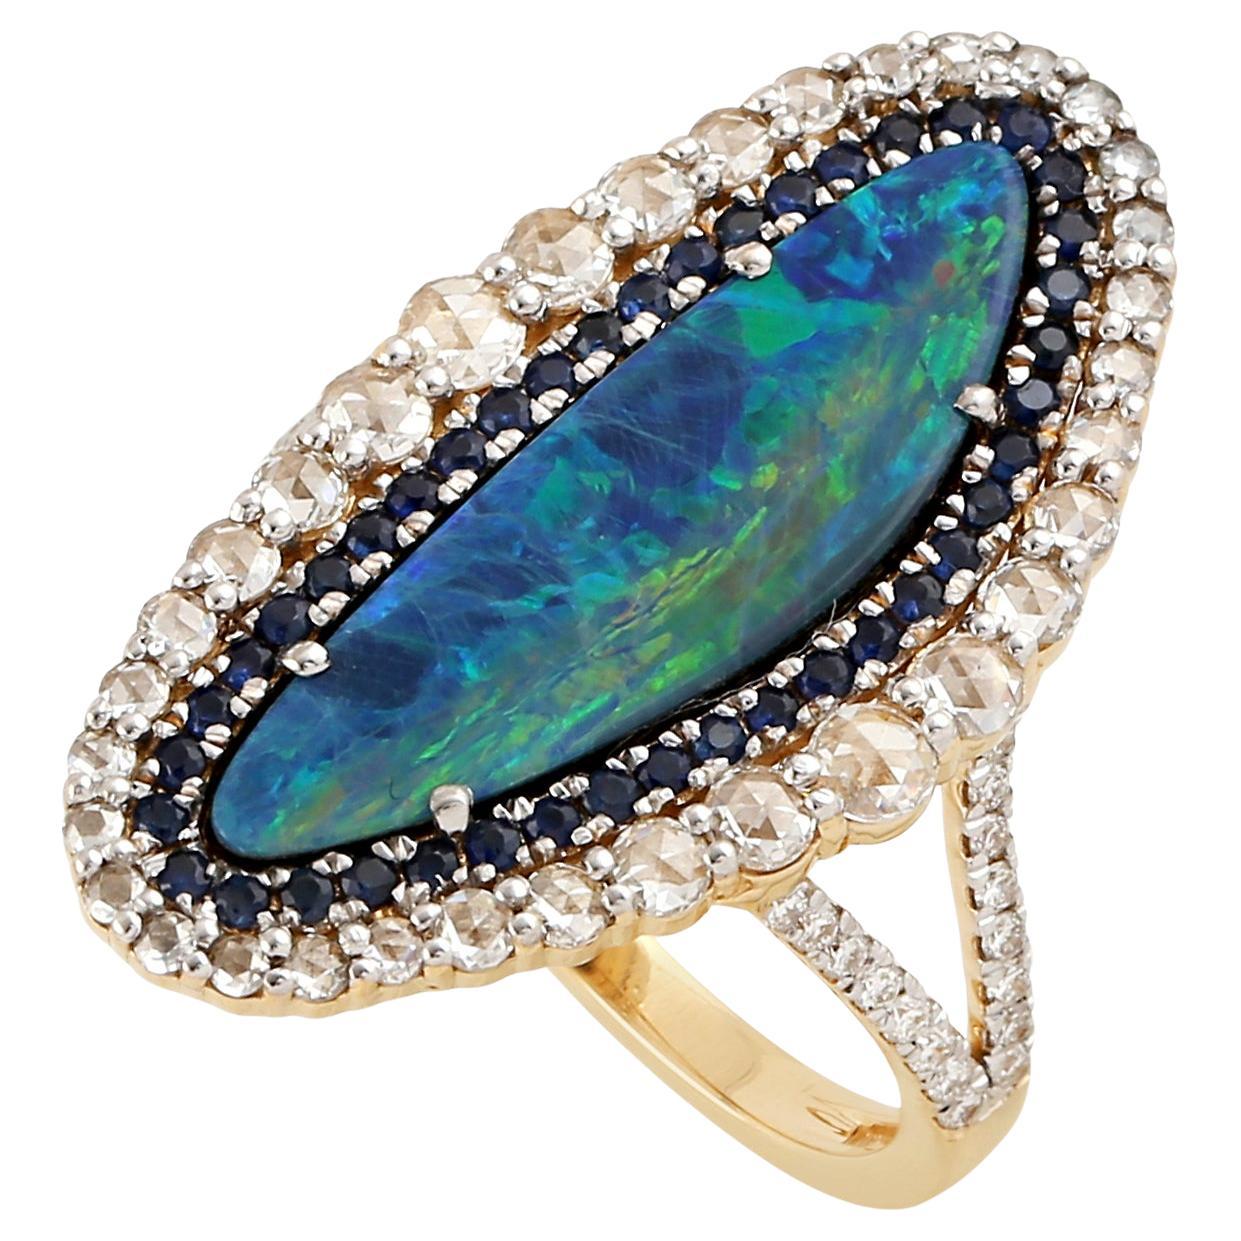 Double opal Cocktail Ring With Blue Sapphire & Diamonds Made In 18k Yellow Gold For Sale